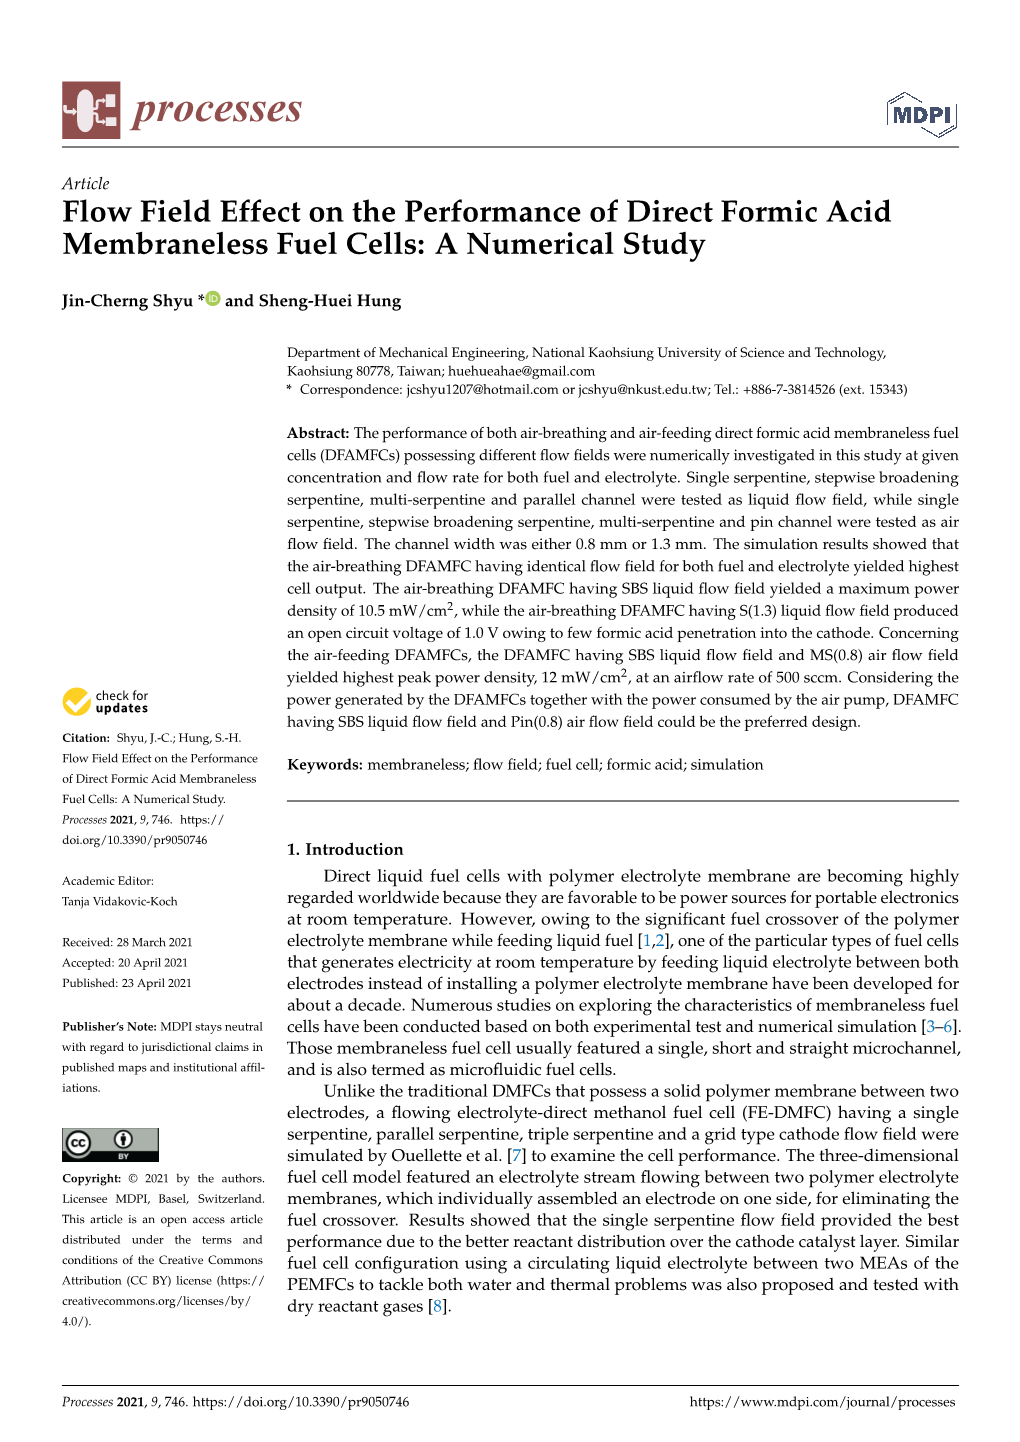 Flow Field Effect on the Performance of Direct Formic Acid Membraneless Fuel Cells: a Numerical Study